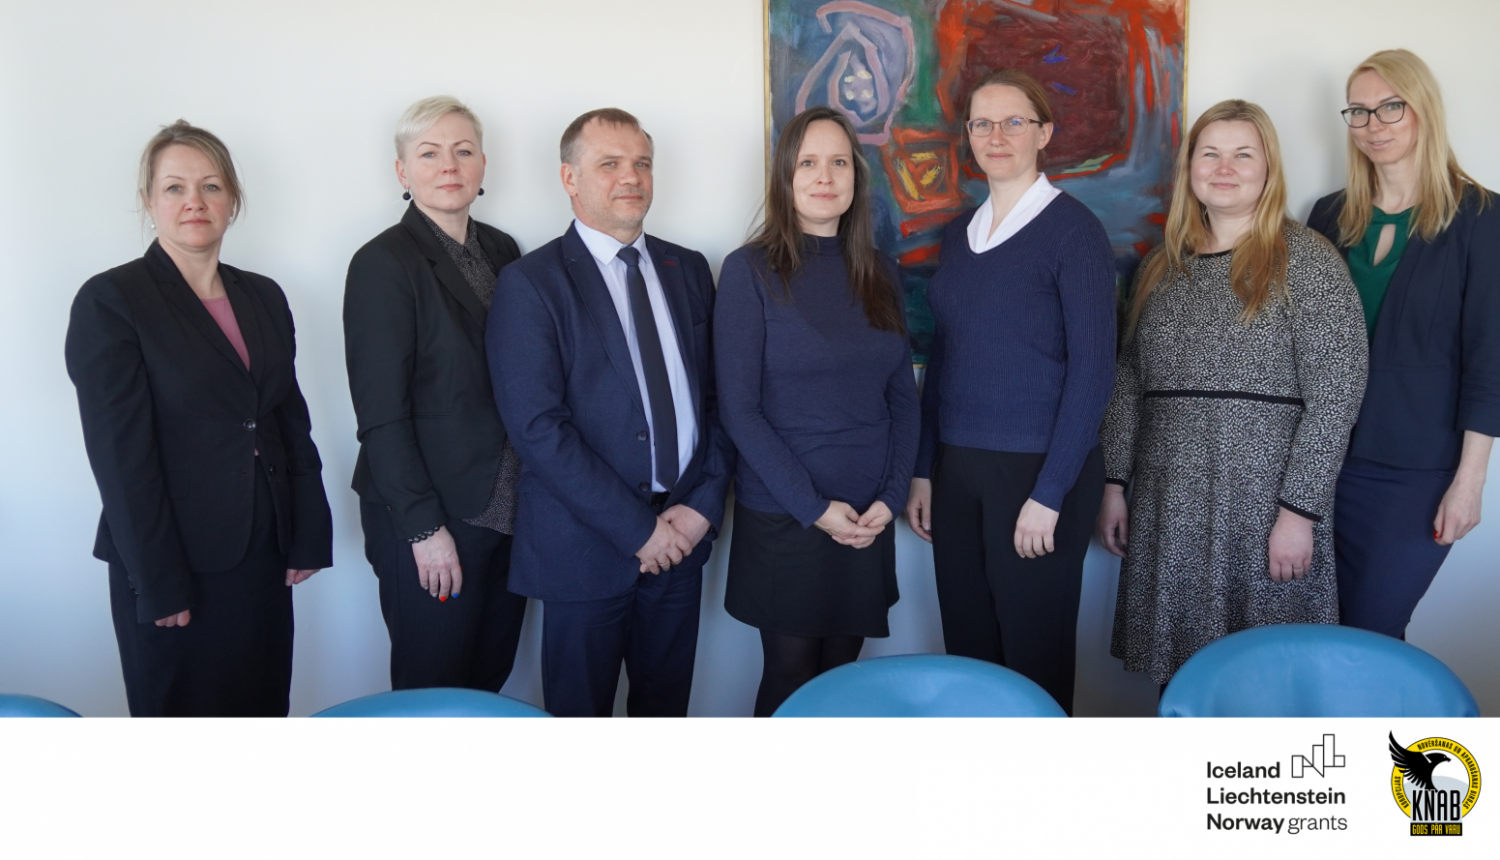 Meeting of representatives of KNAB and Icelandic Prime Minister’s Office